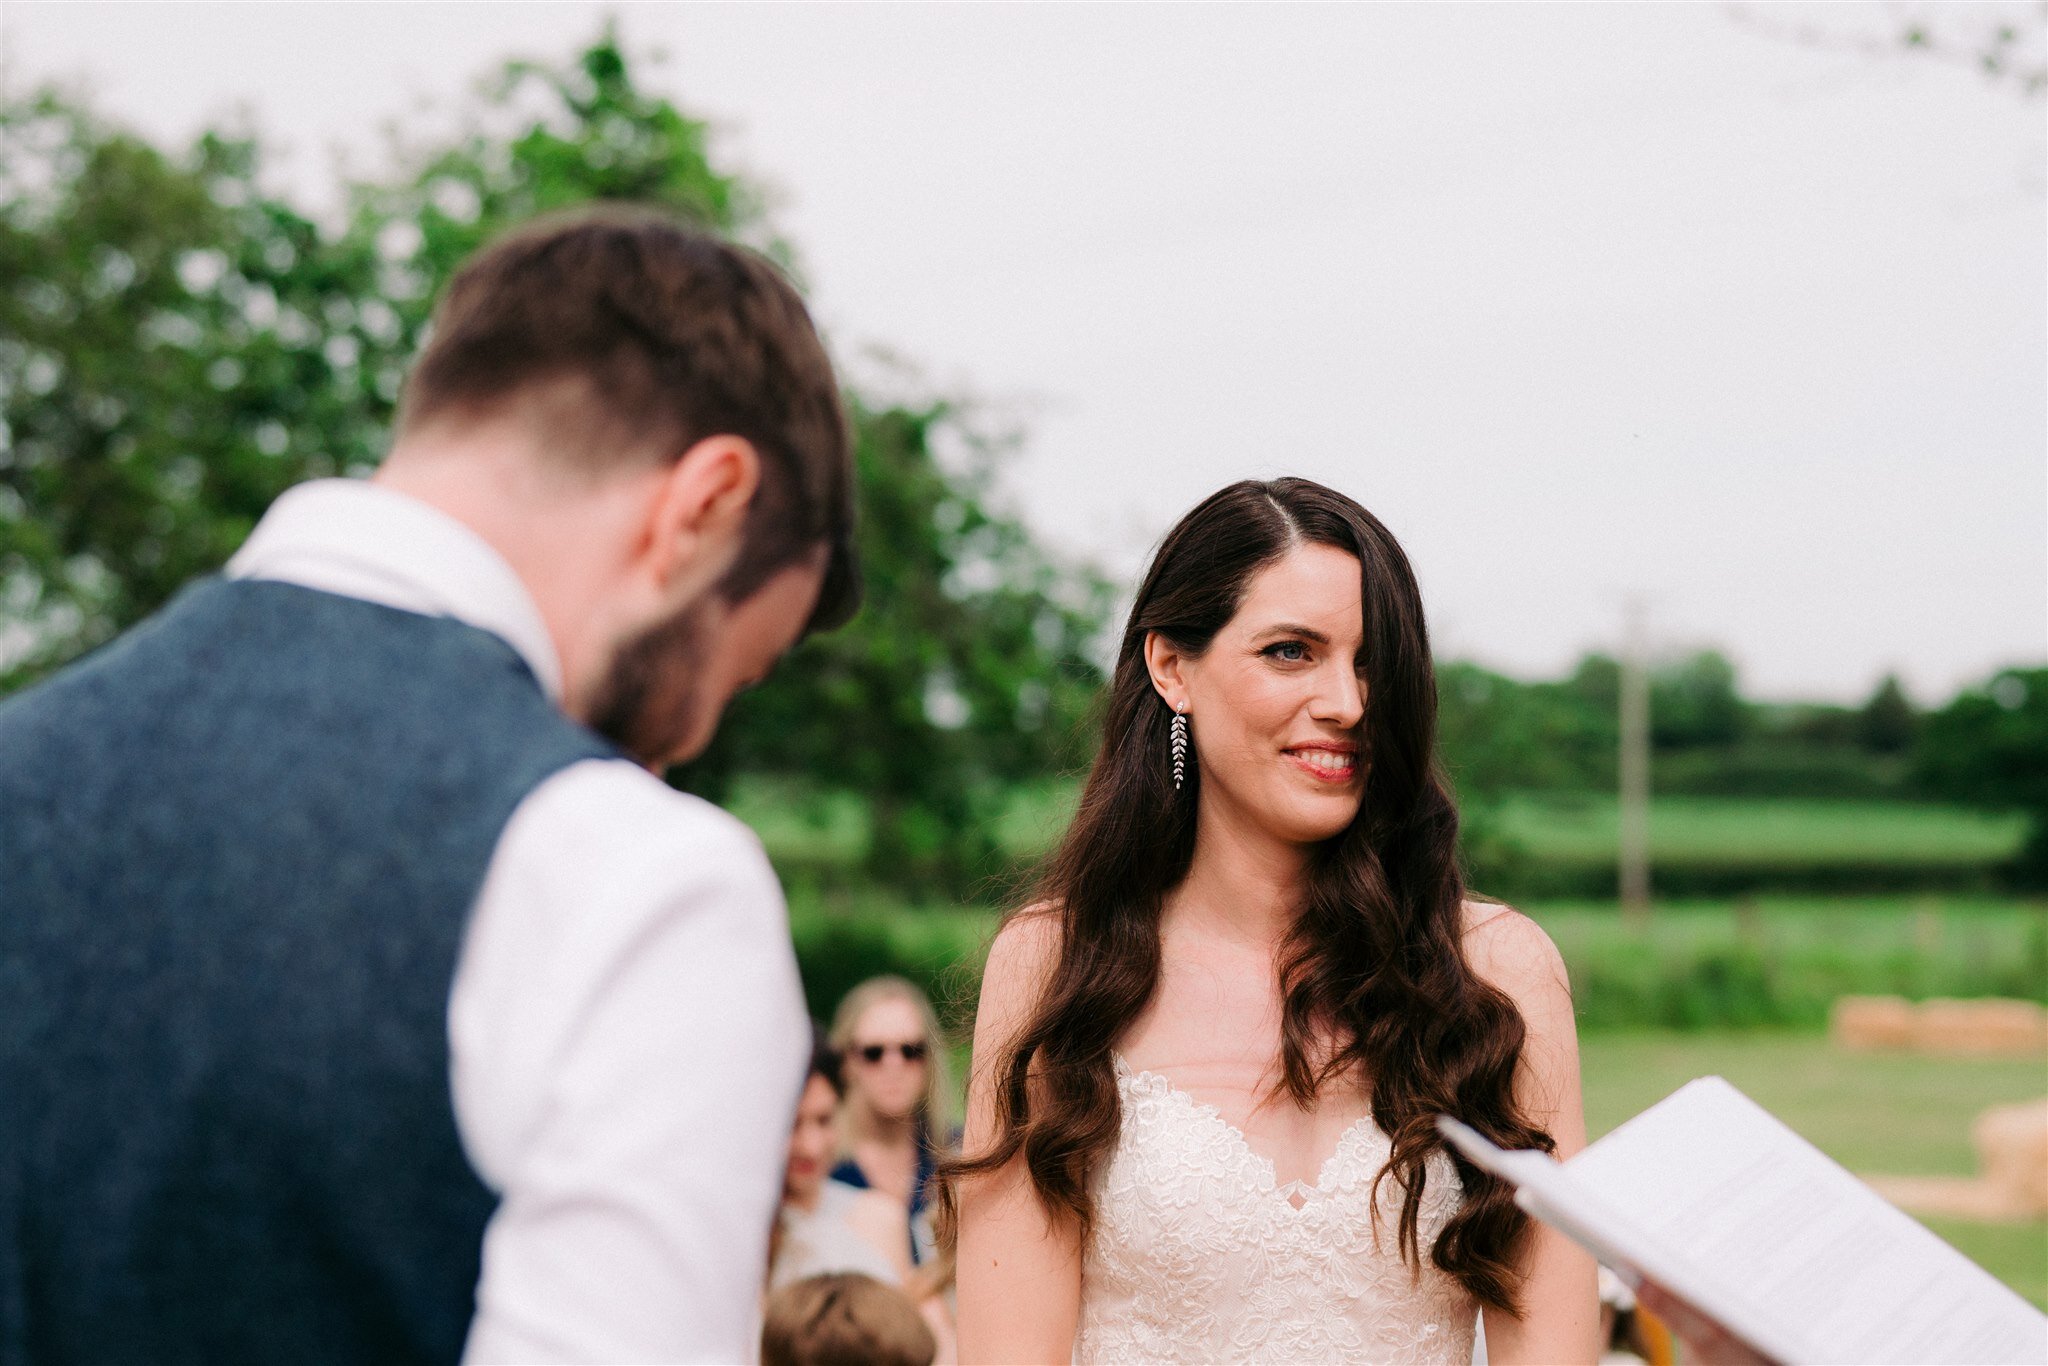 Natural Wedding photographer in South East England